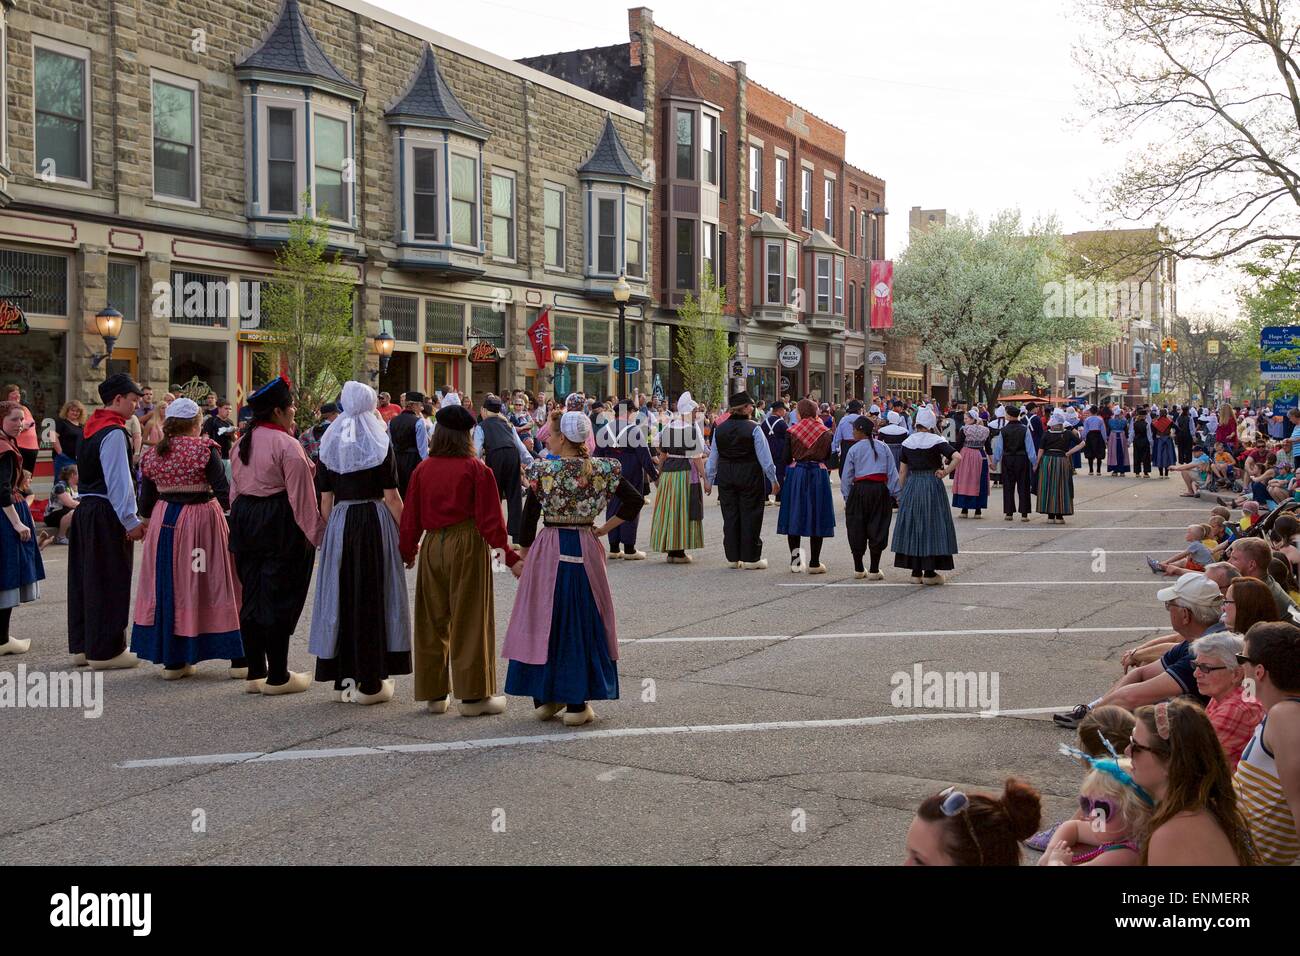 Dancers in traditional Dutch attire line up in the street to perform klompen dancing at Tulip Time in Holland, Michigan Stock Photo